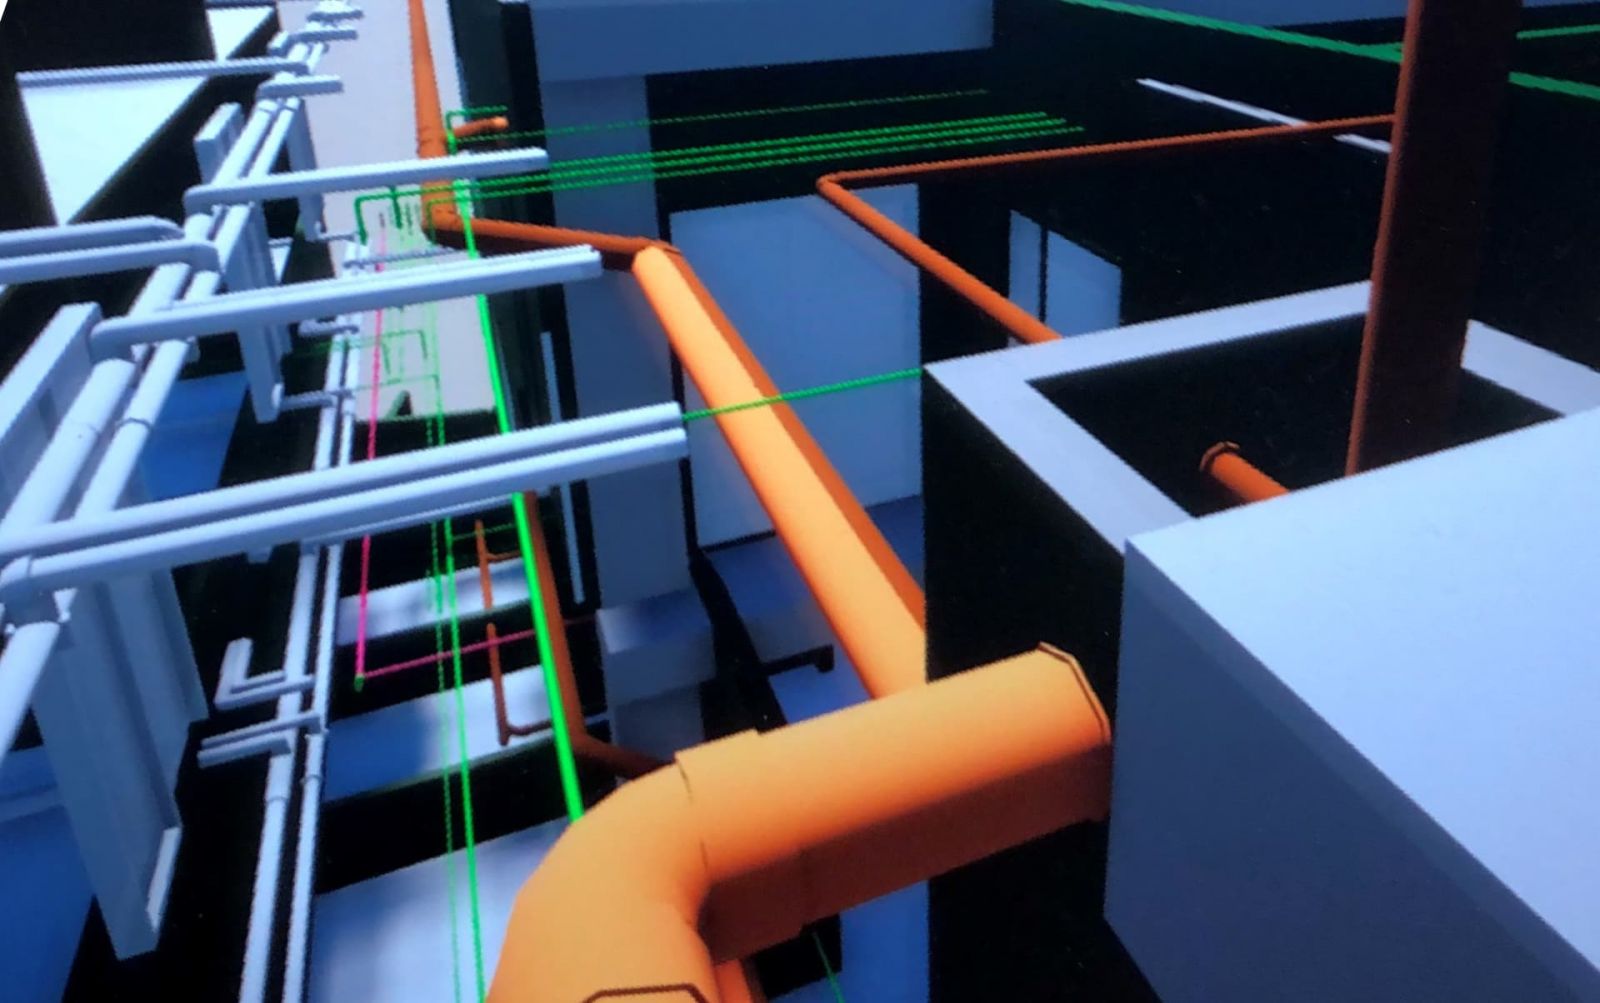 Virtual reality technology can help construction industry professionals see the routing of mechanical and electrical systems in 3D inside the walls of a structure. (Image courtesy Ramyani Sengupta)